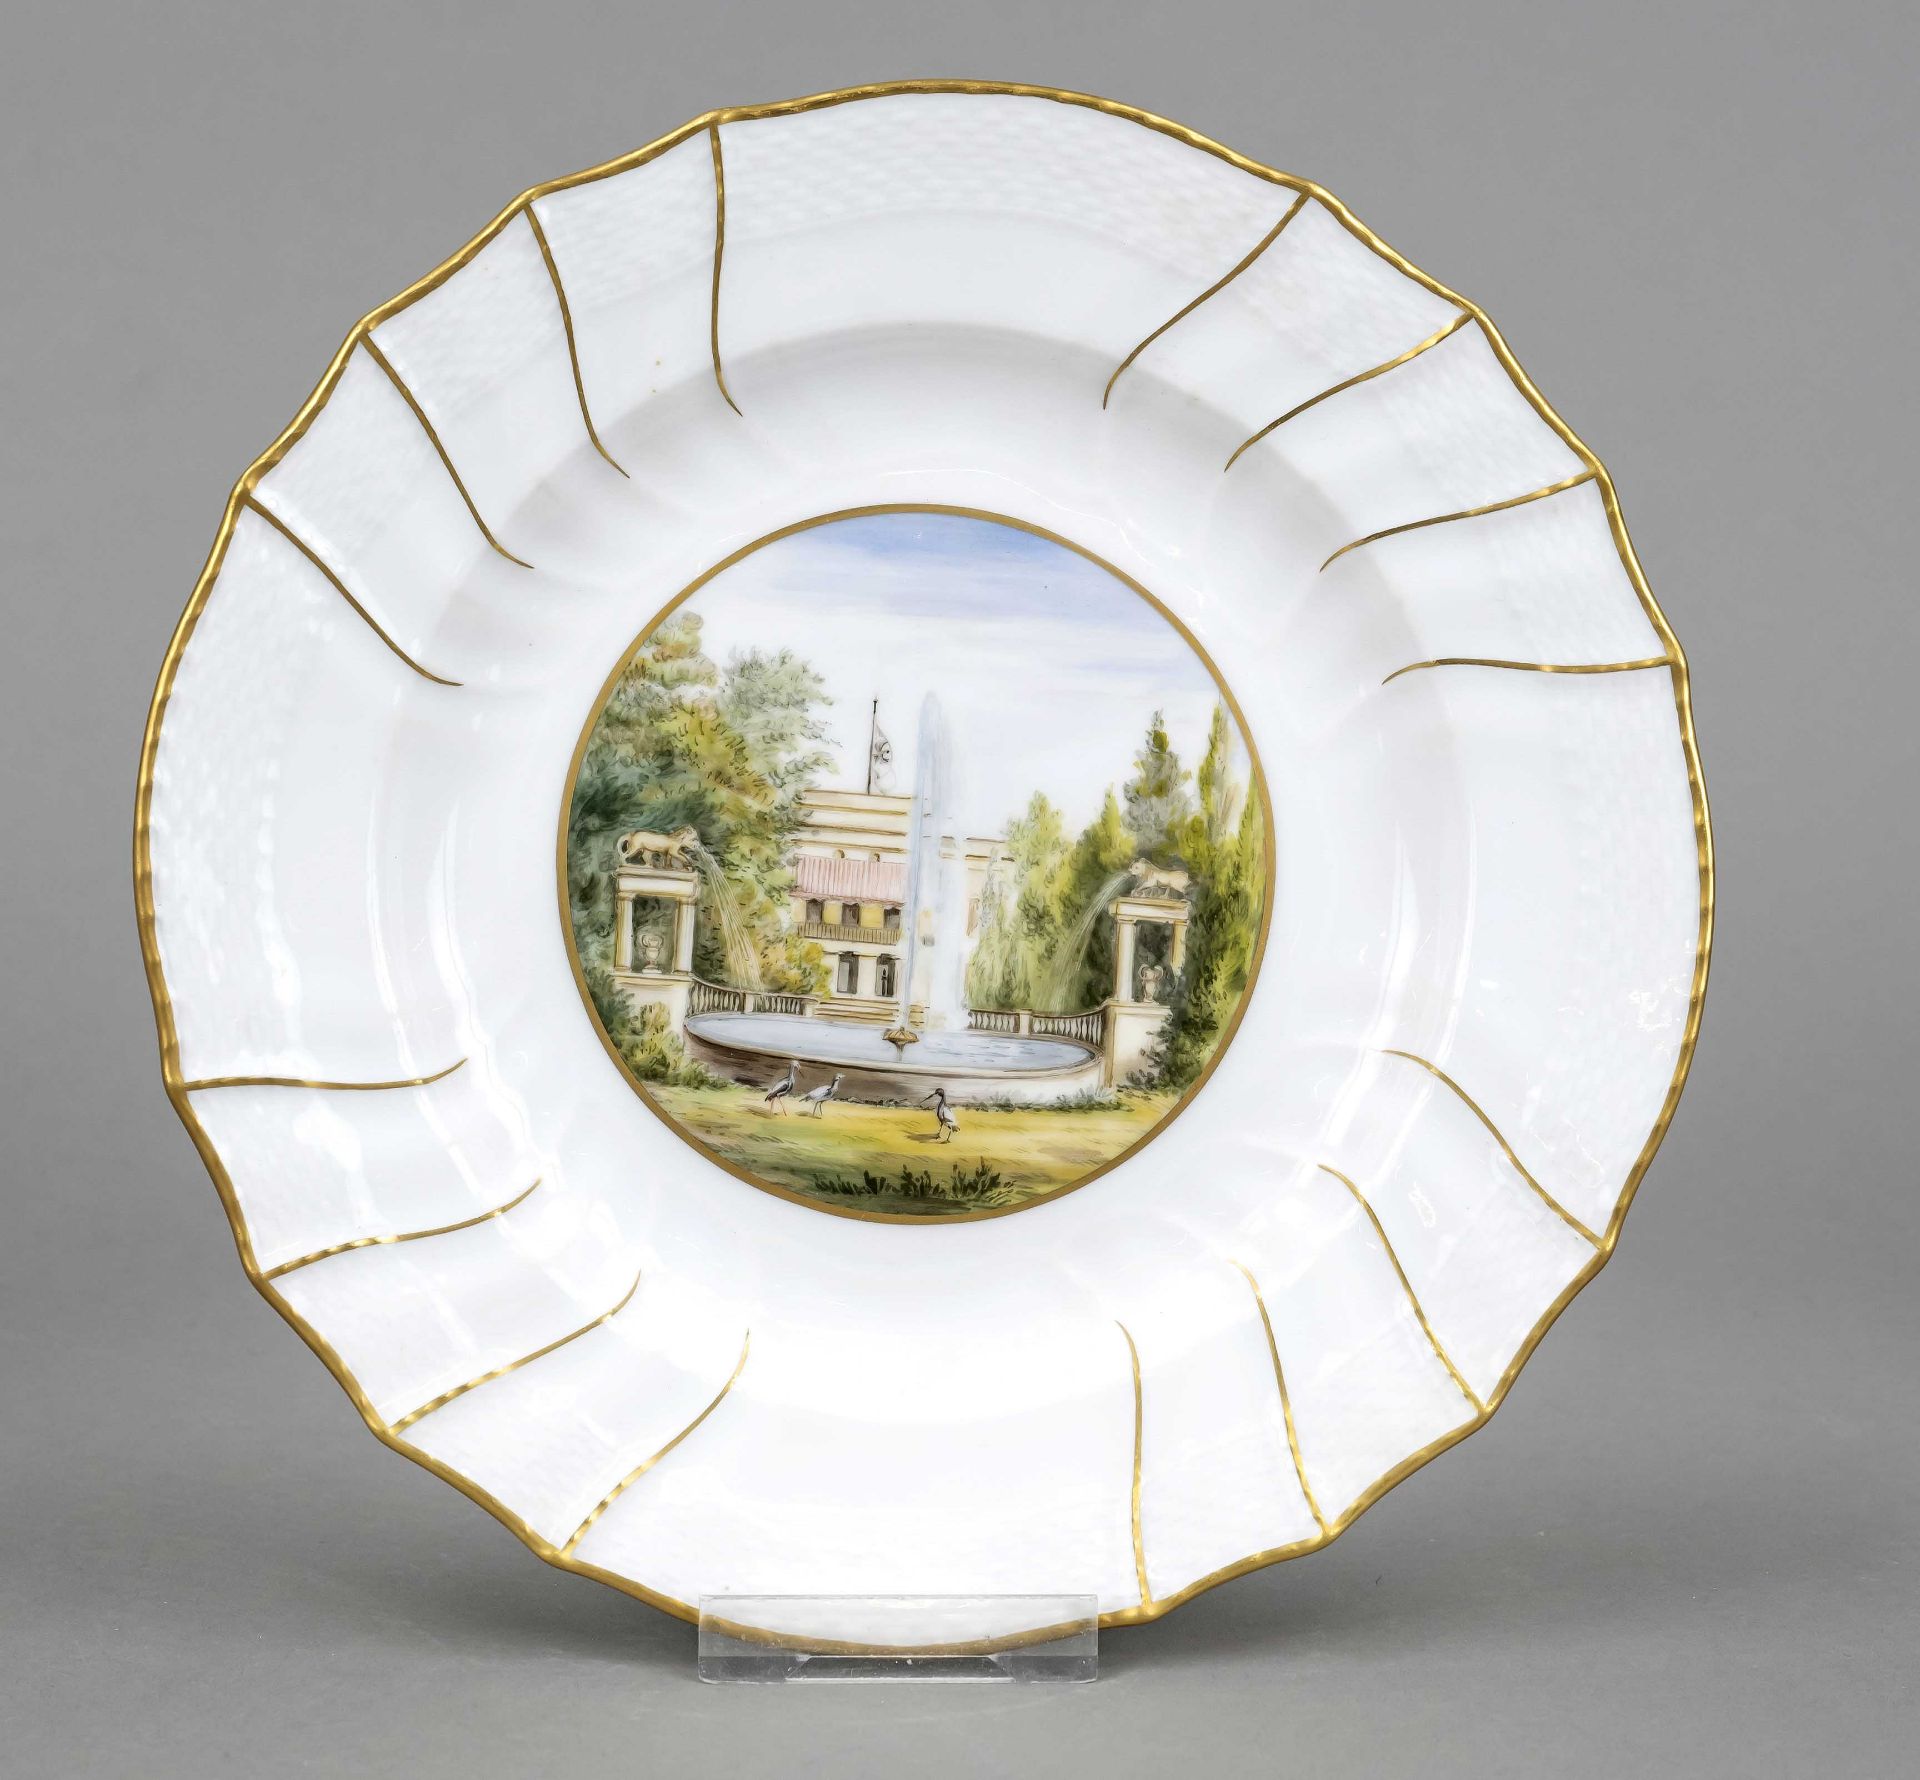 View plate, KPM Berlin, 19th century, Neuozier form, mirrored view of Glienicke Palace as the seat